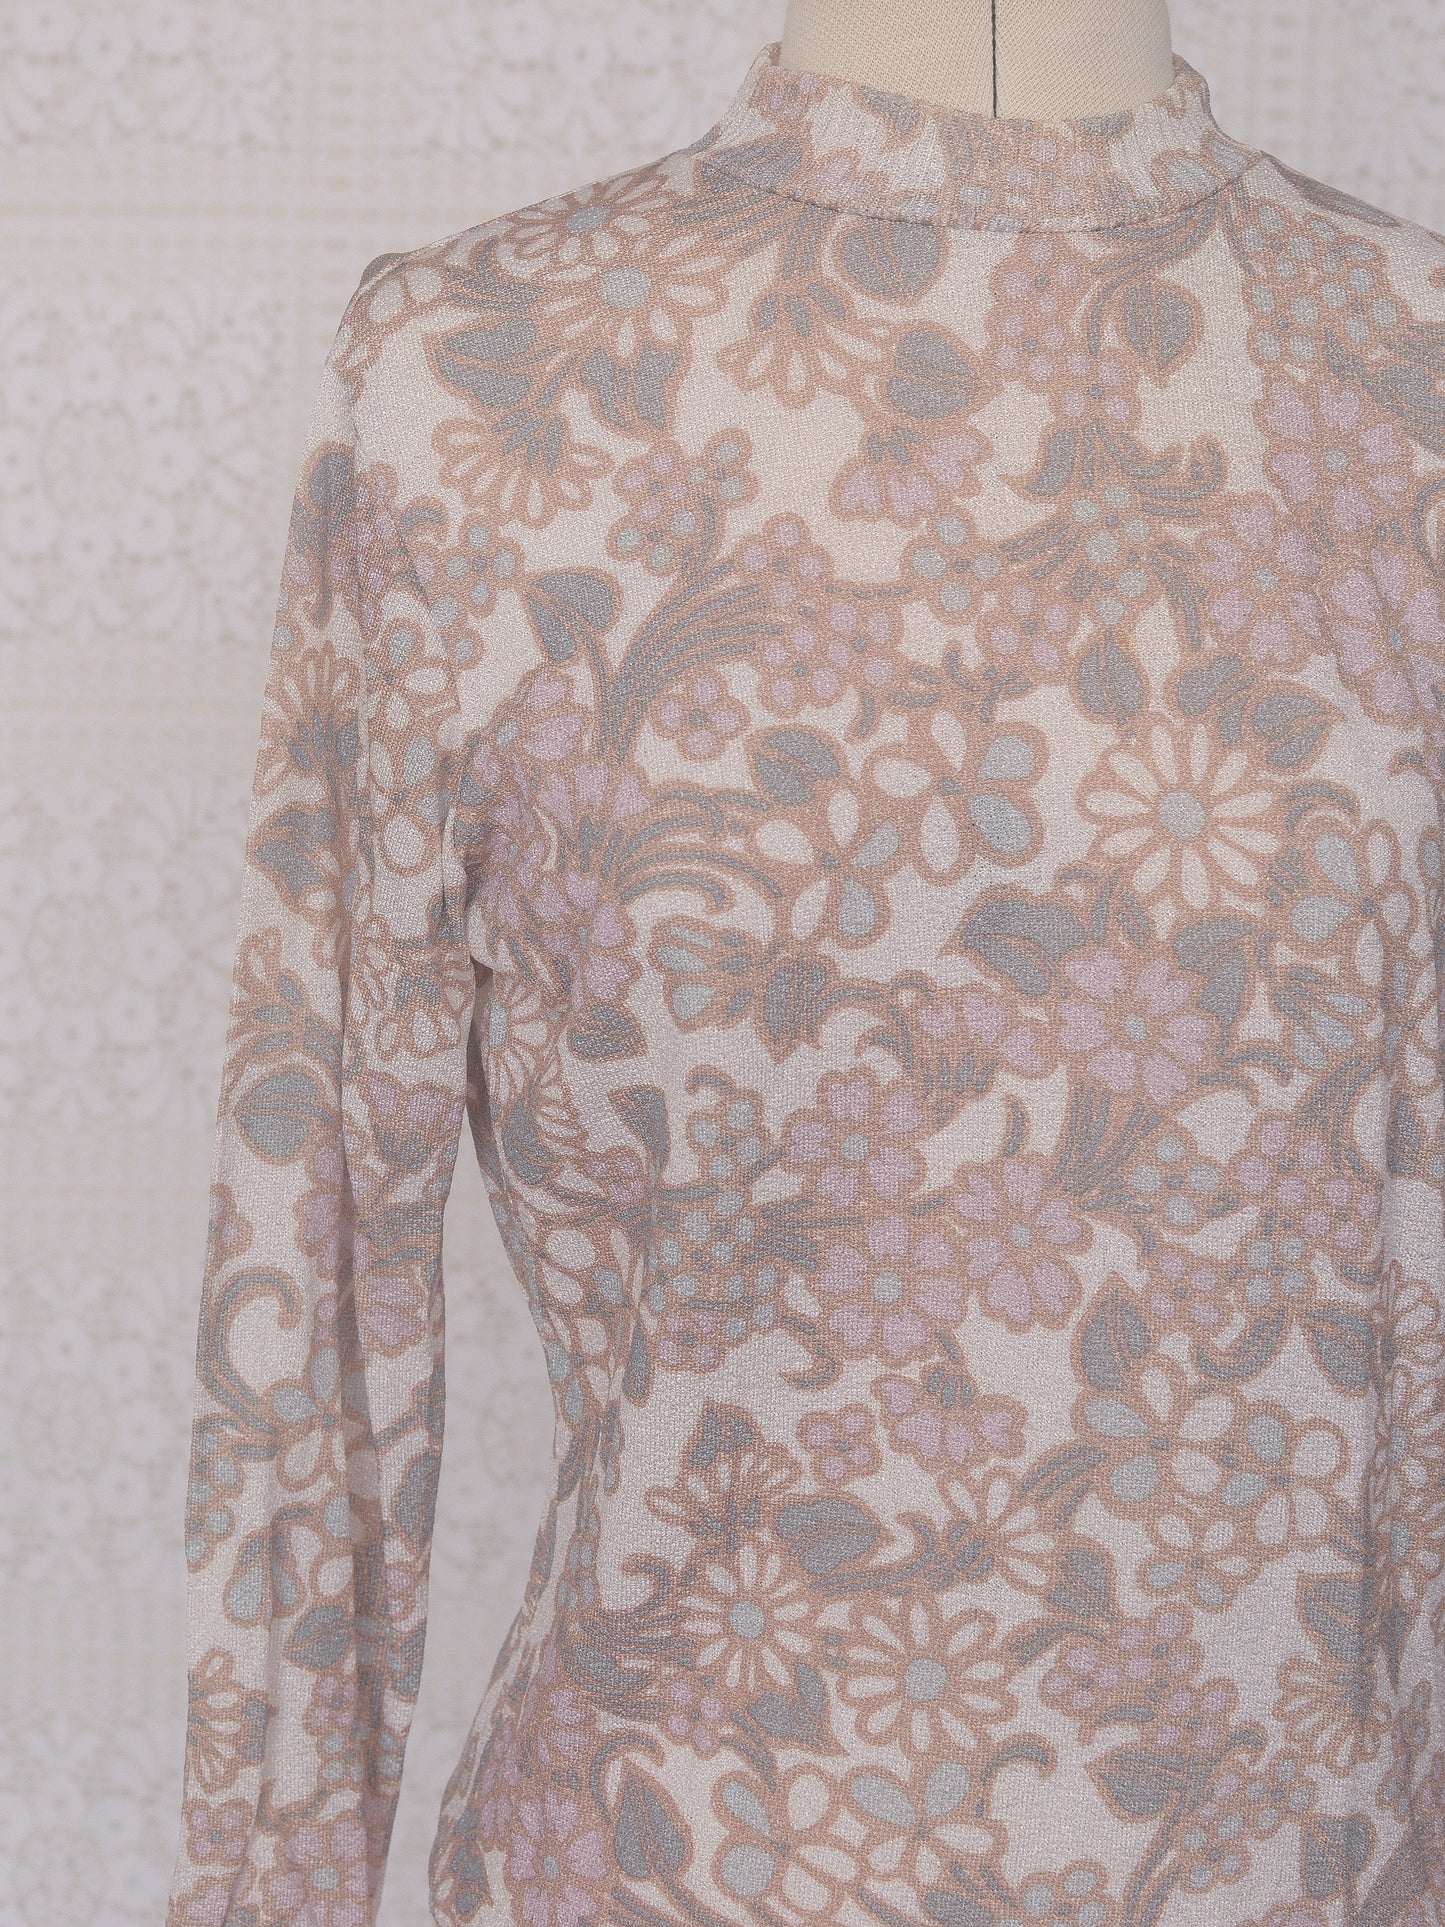 1970s cream, brown and pink floral turtleneck long sleeve jumper